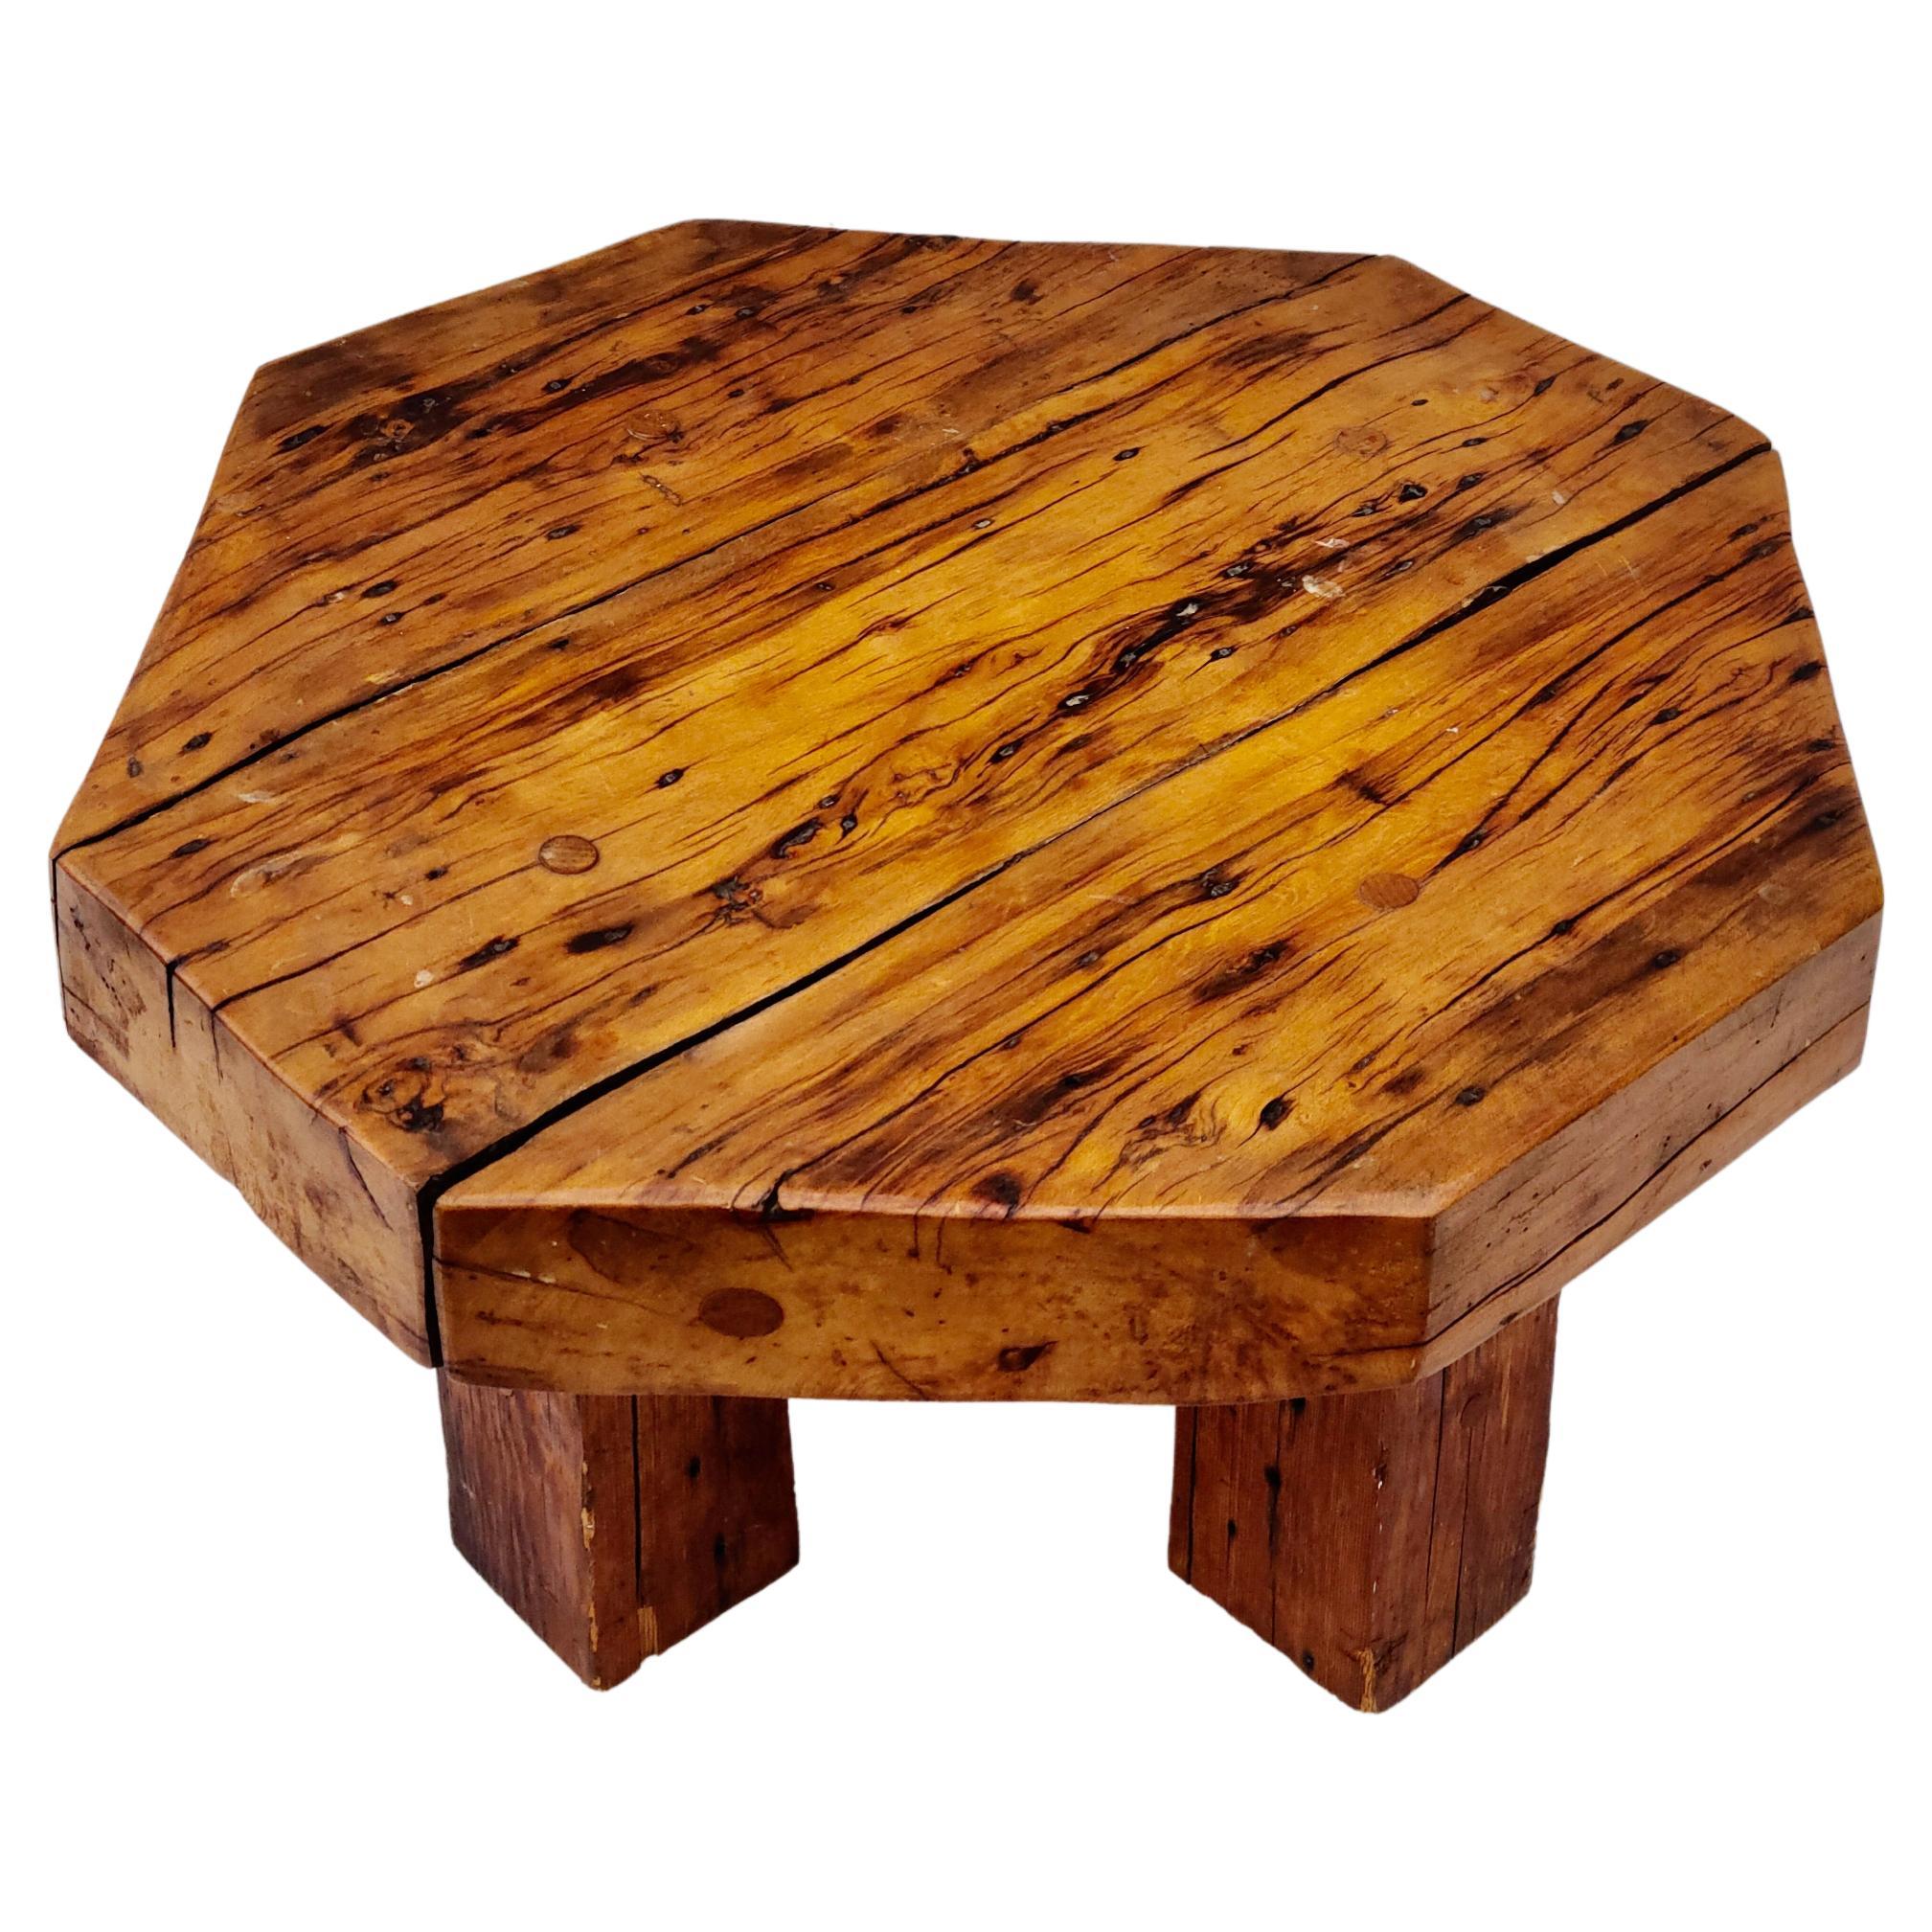 North American Studio Craft Coffee Table Spalted Applewood and Fir Signed Tom WIlliams For Sale